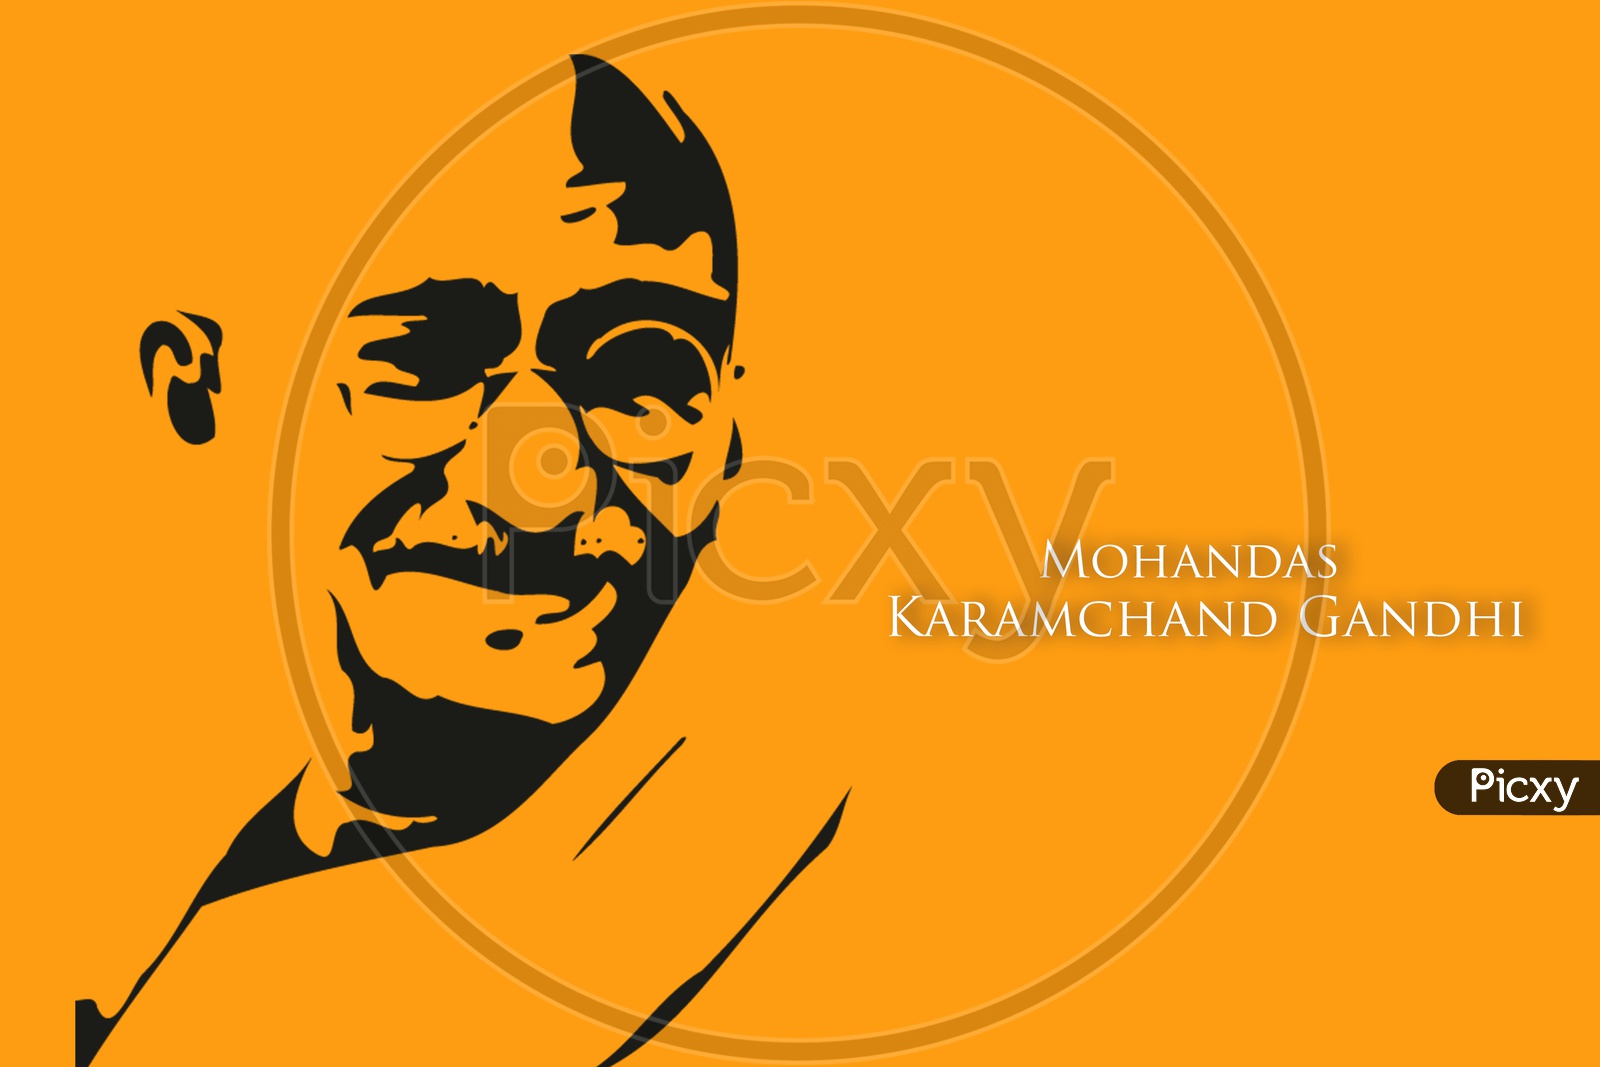 Stock vector illustration of Mohandas Karamchand Gandhi , great Indian freedom fighter known as father of the nation who promoted non violence